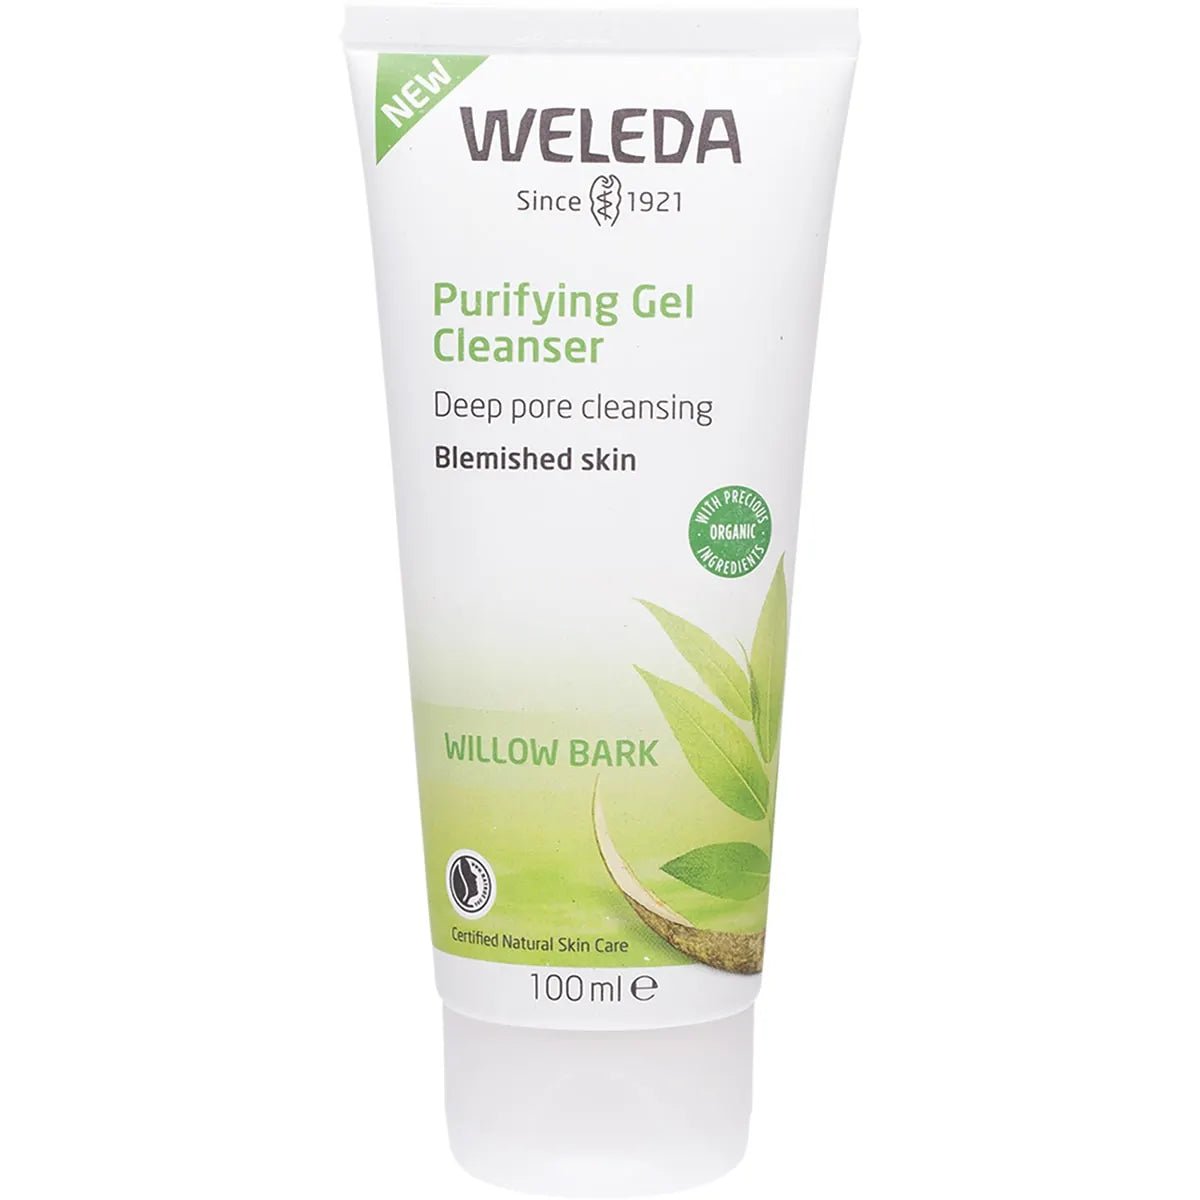 Weleda Purifying Gel Cleanser Willow Bark 100ml - Dr Earth - Skincare